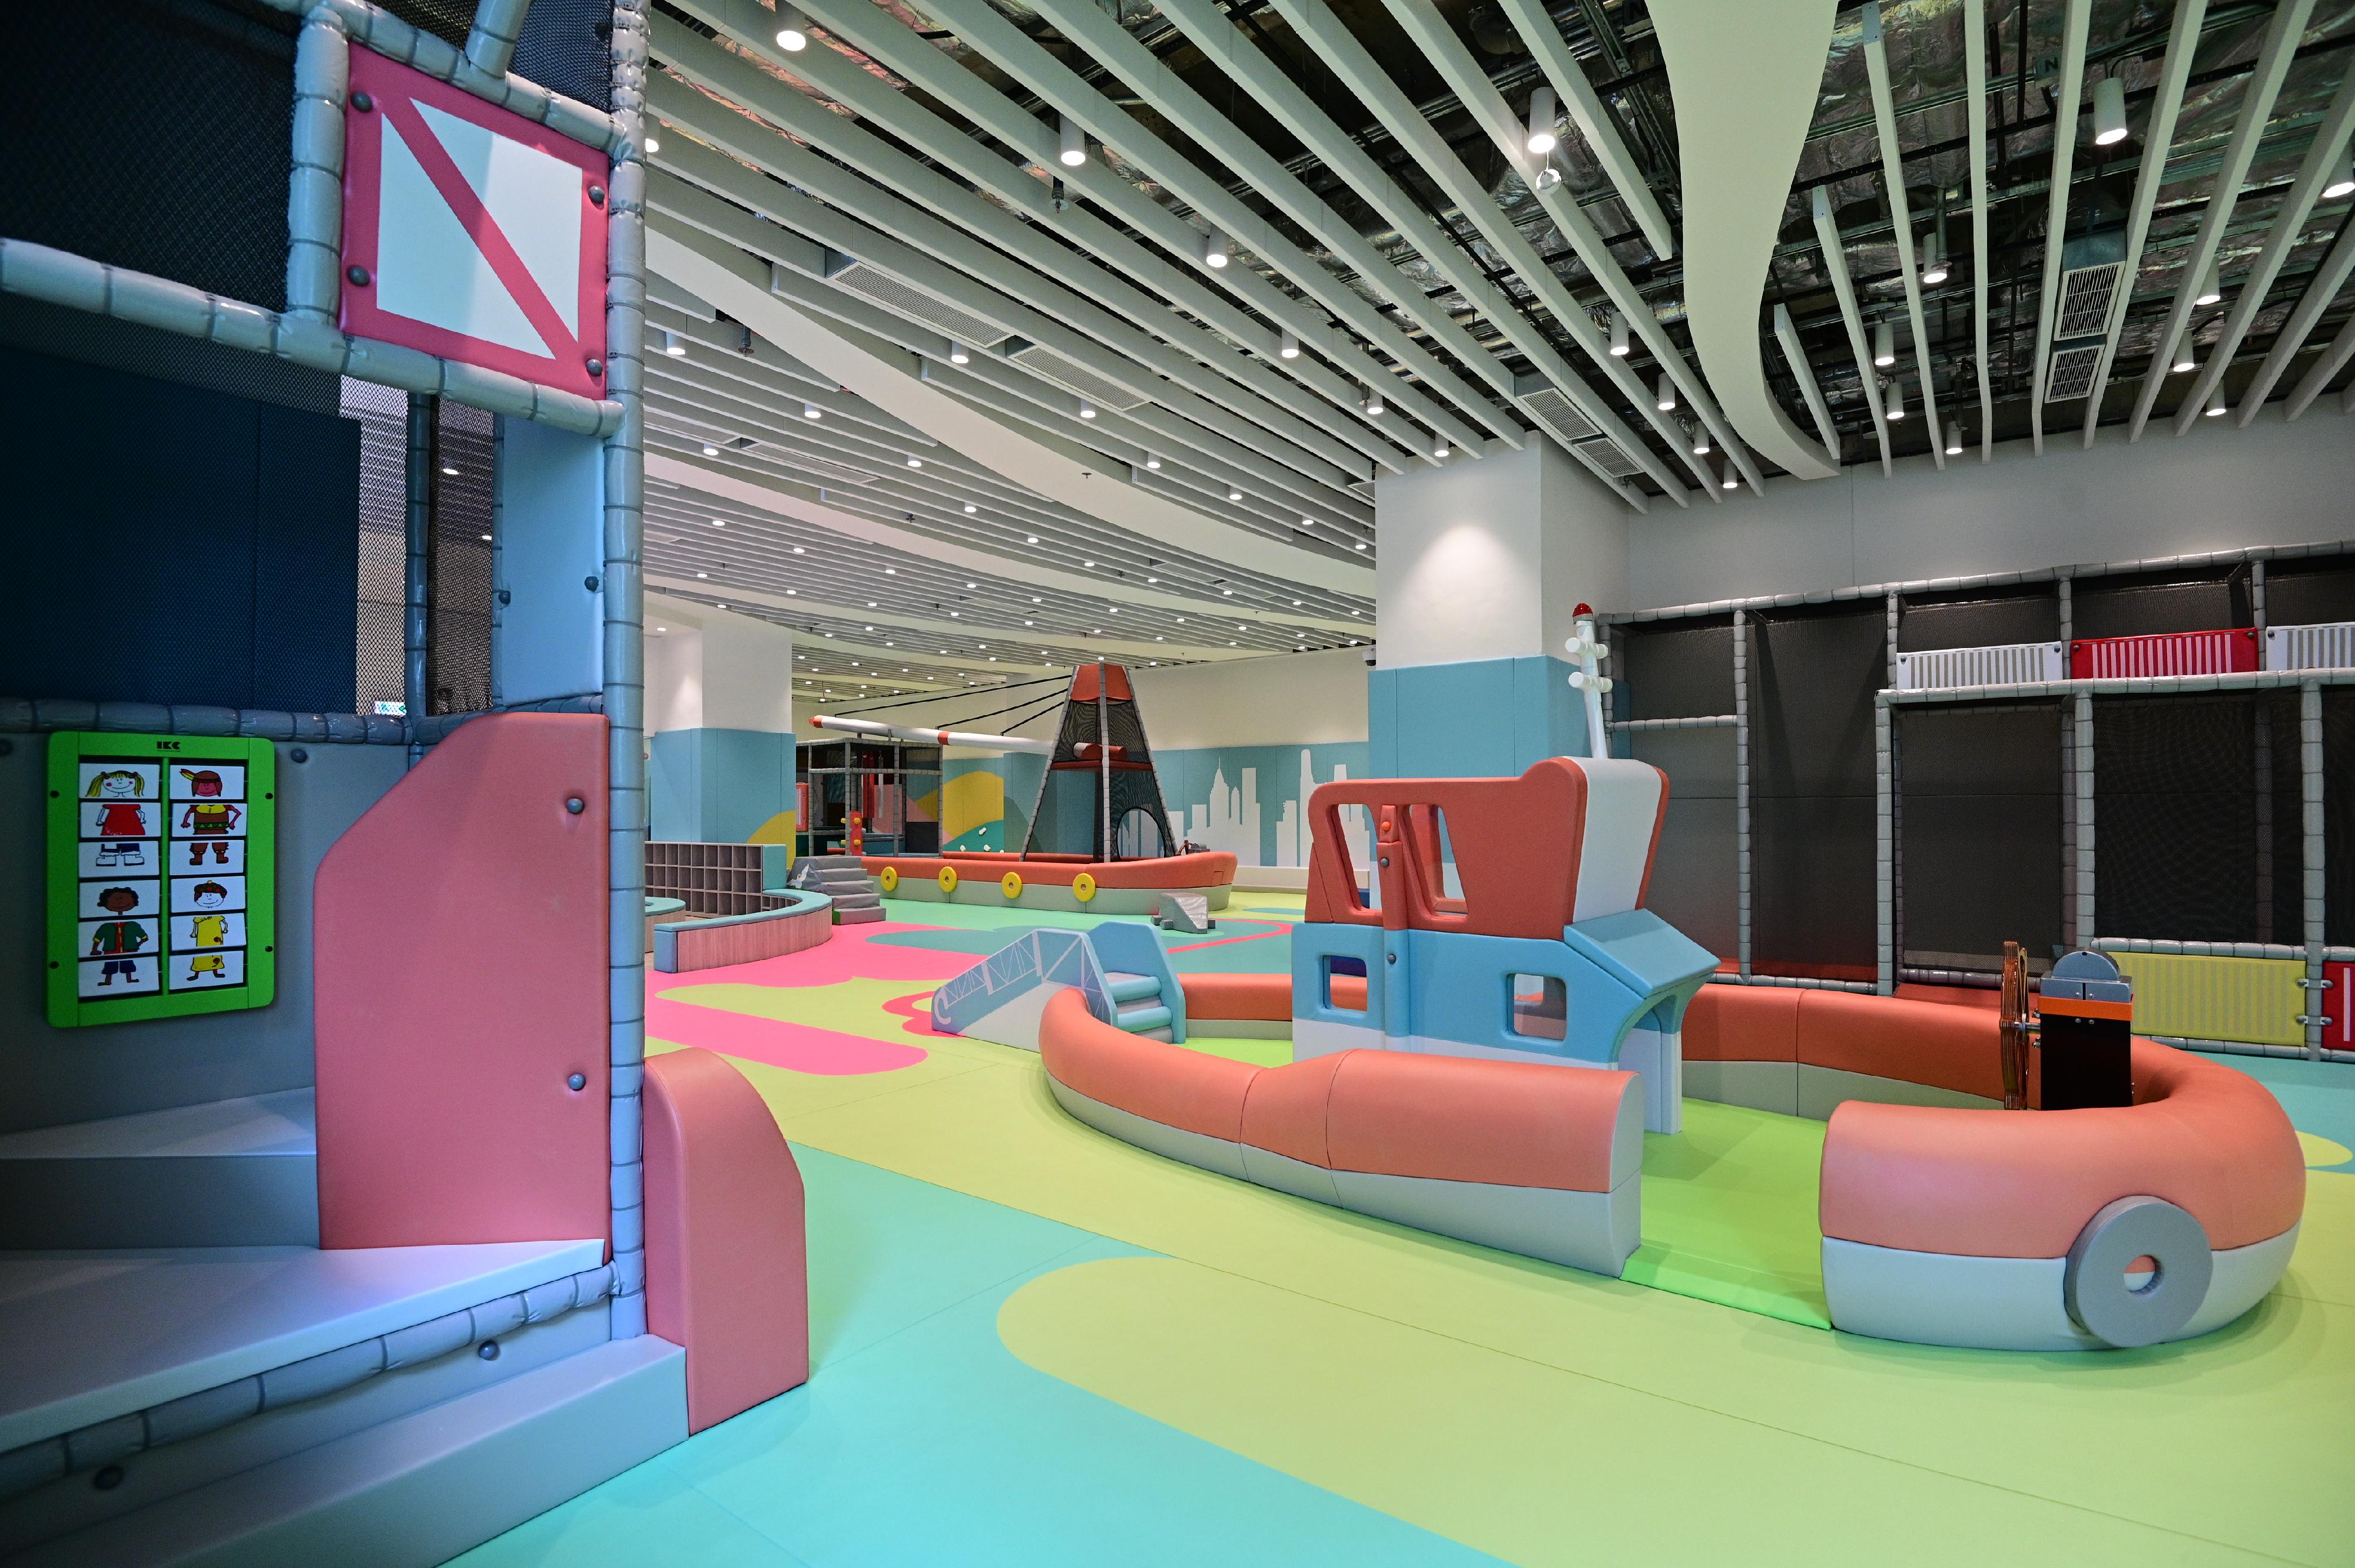 Sham Shui Po Sports Centre, managed by the Leisure and Cultural Services Department, will open for public use on September 28 (Wednesday), providing a wide range of leisure and sports facilities. Photo shows the children's play room.